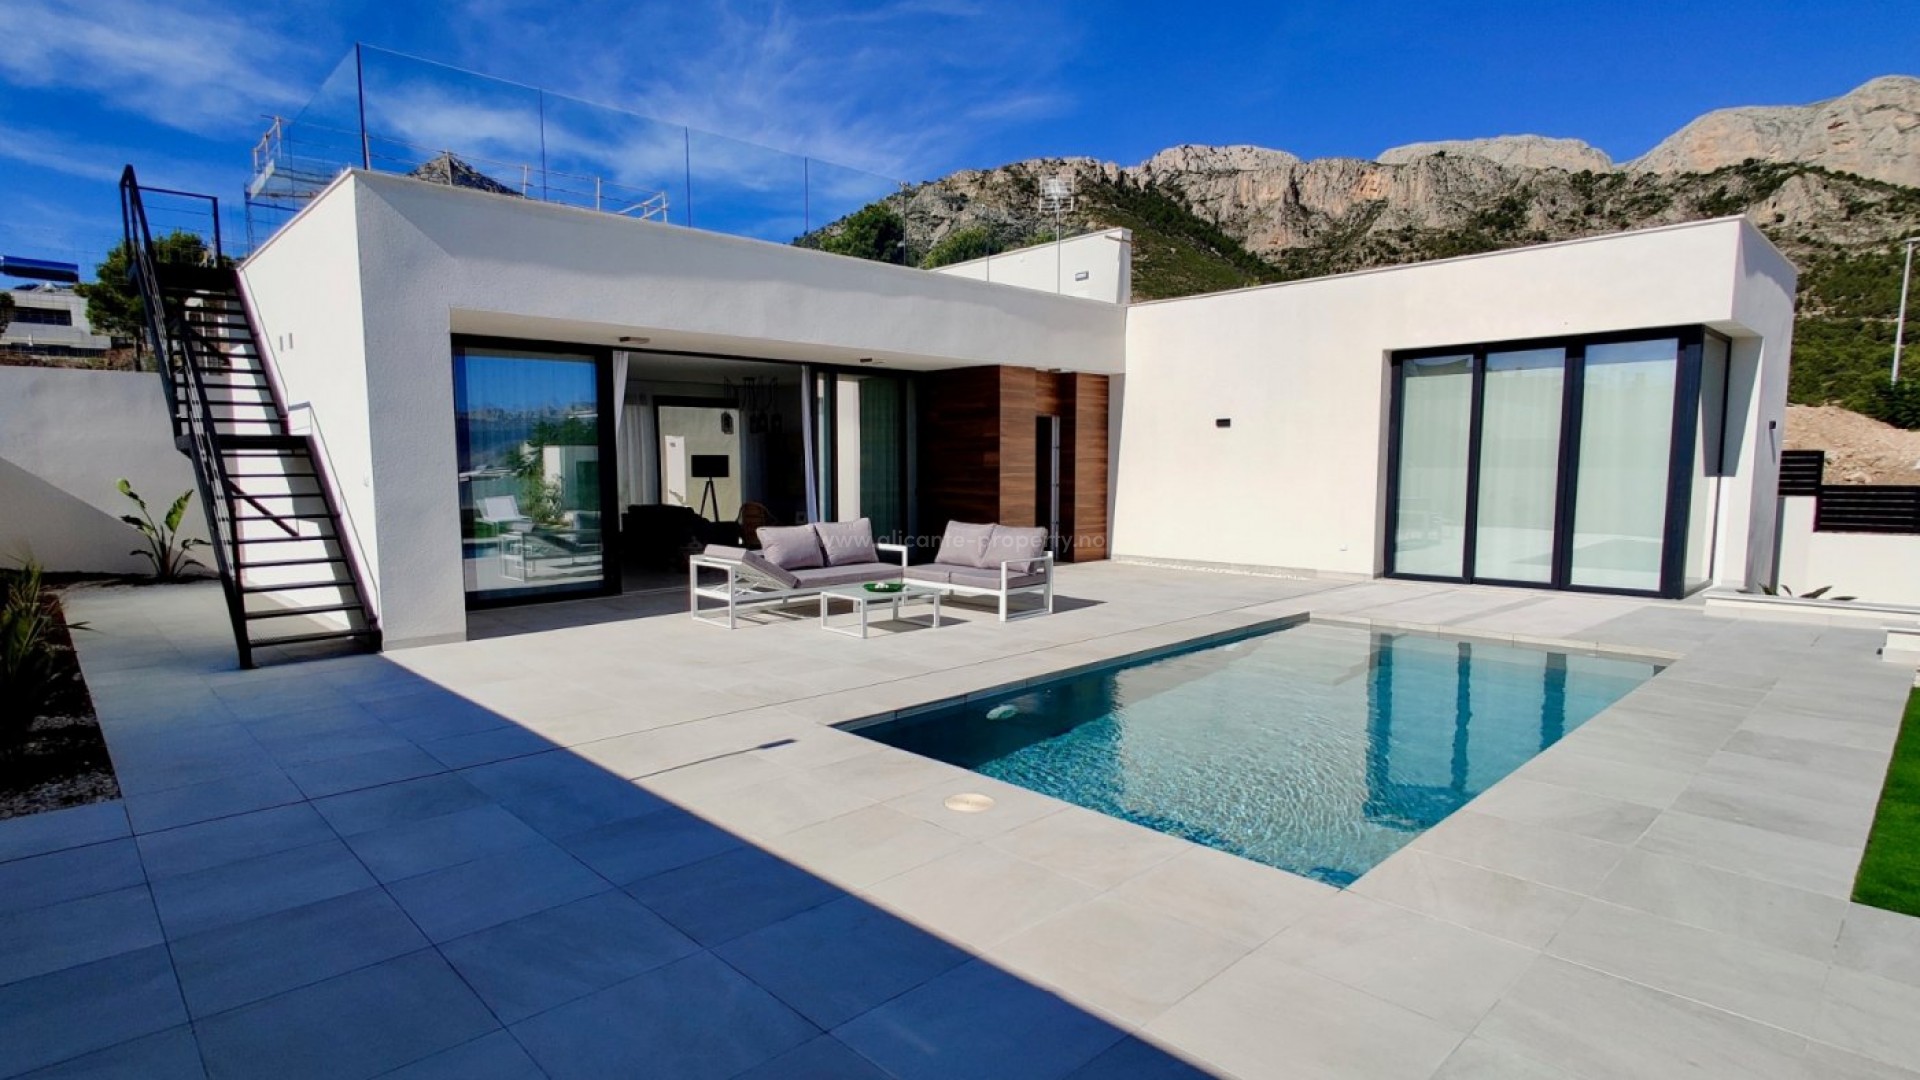 New Villas/houses in Polop with sea views, near Benidorm. Finished garden Pool 6x3 m solarium and pool bar. Four houses on plots from 434 m2 to 467 m2